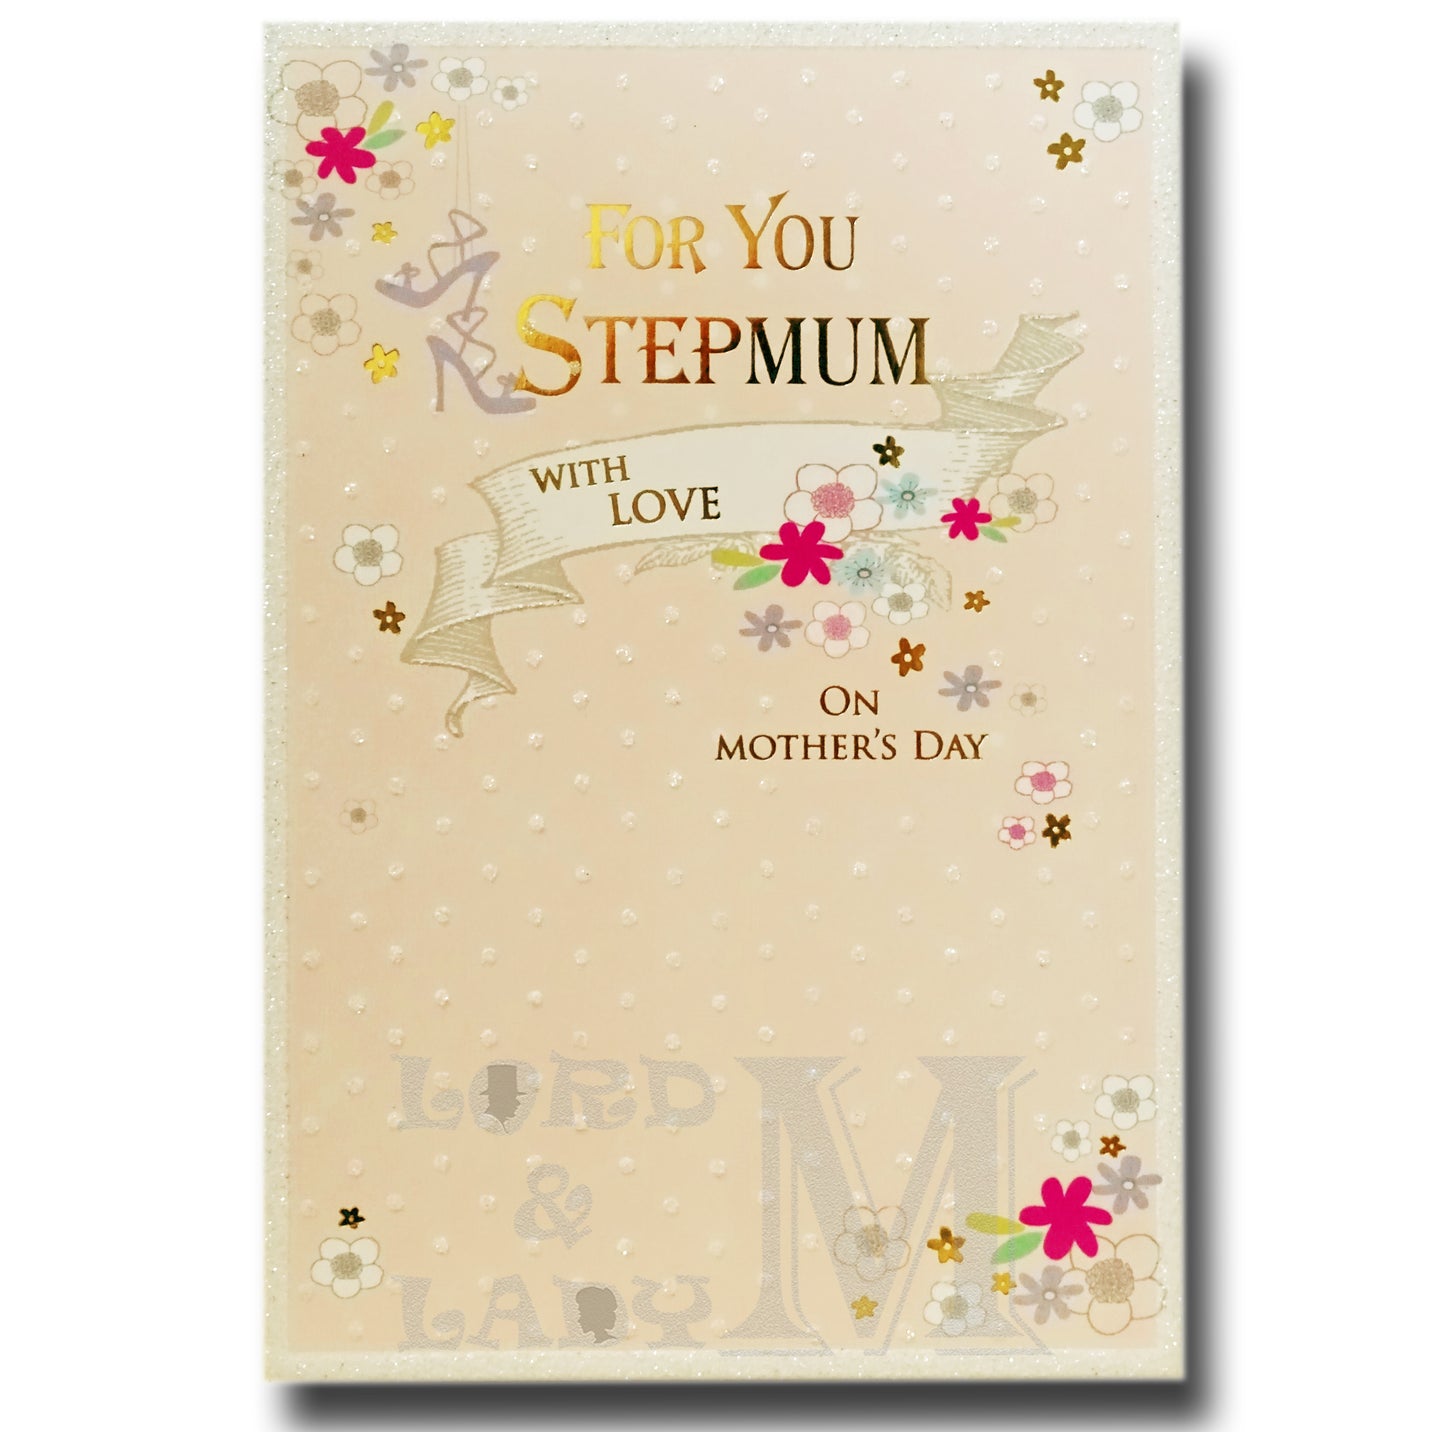 22cm - For You Stepmum With Love - GH